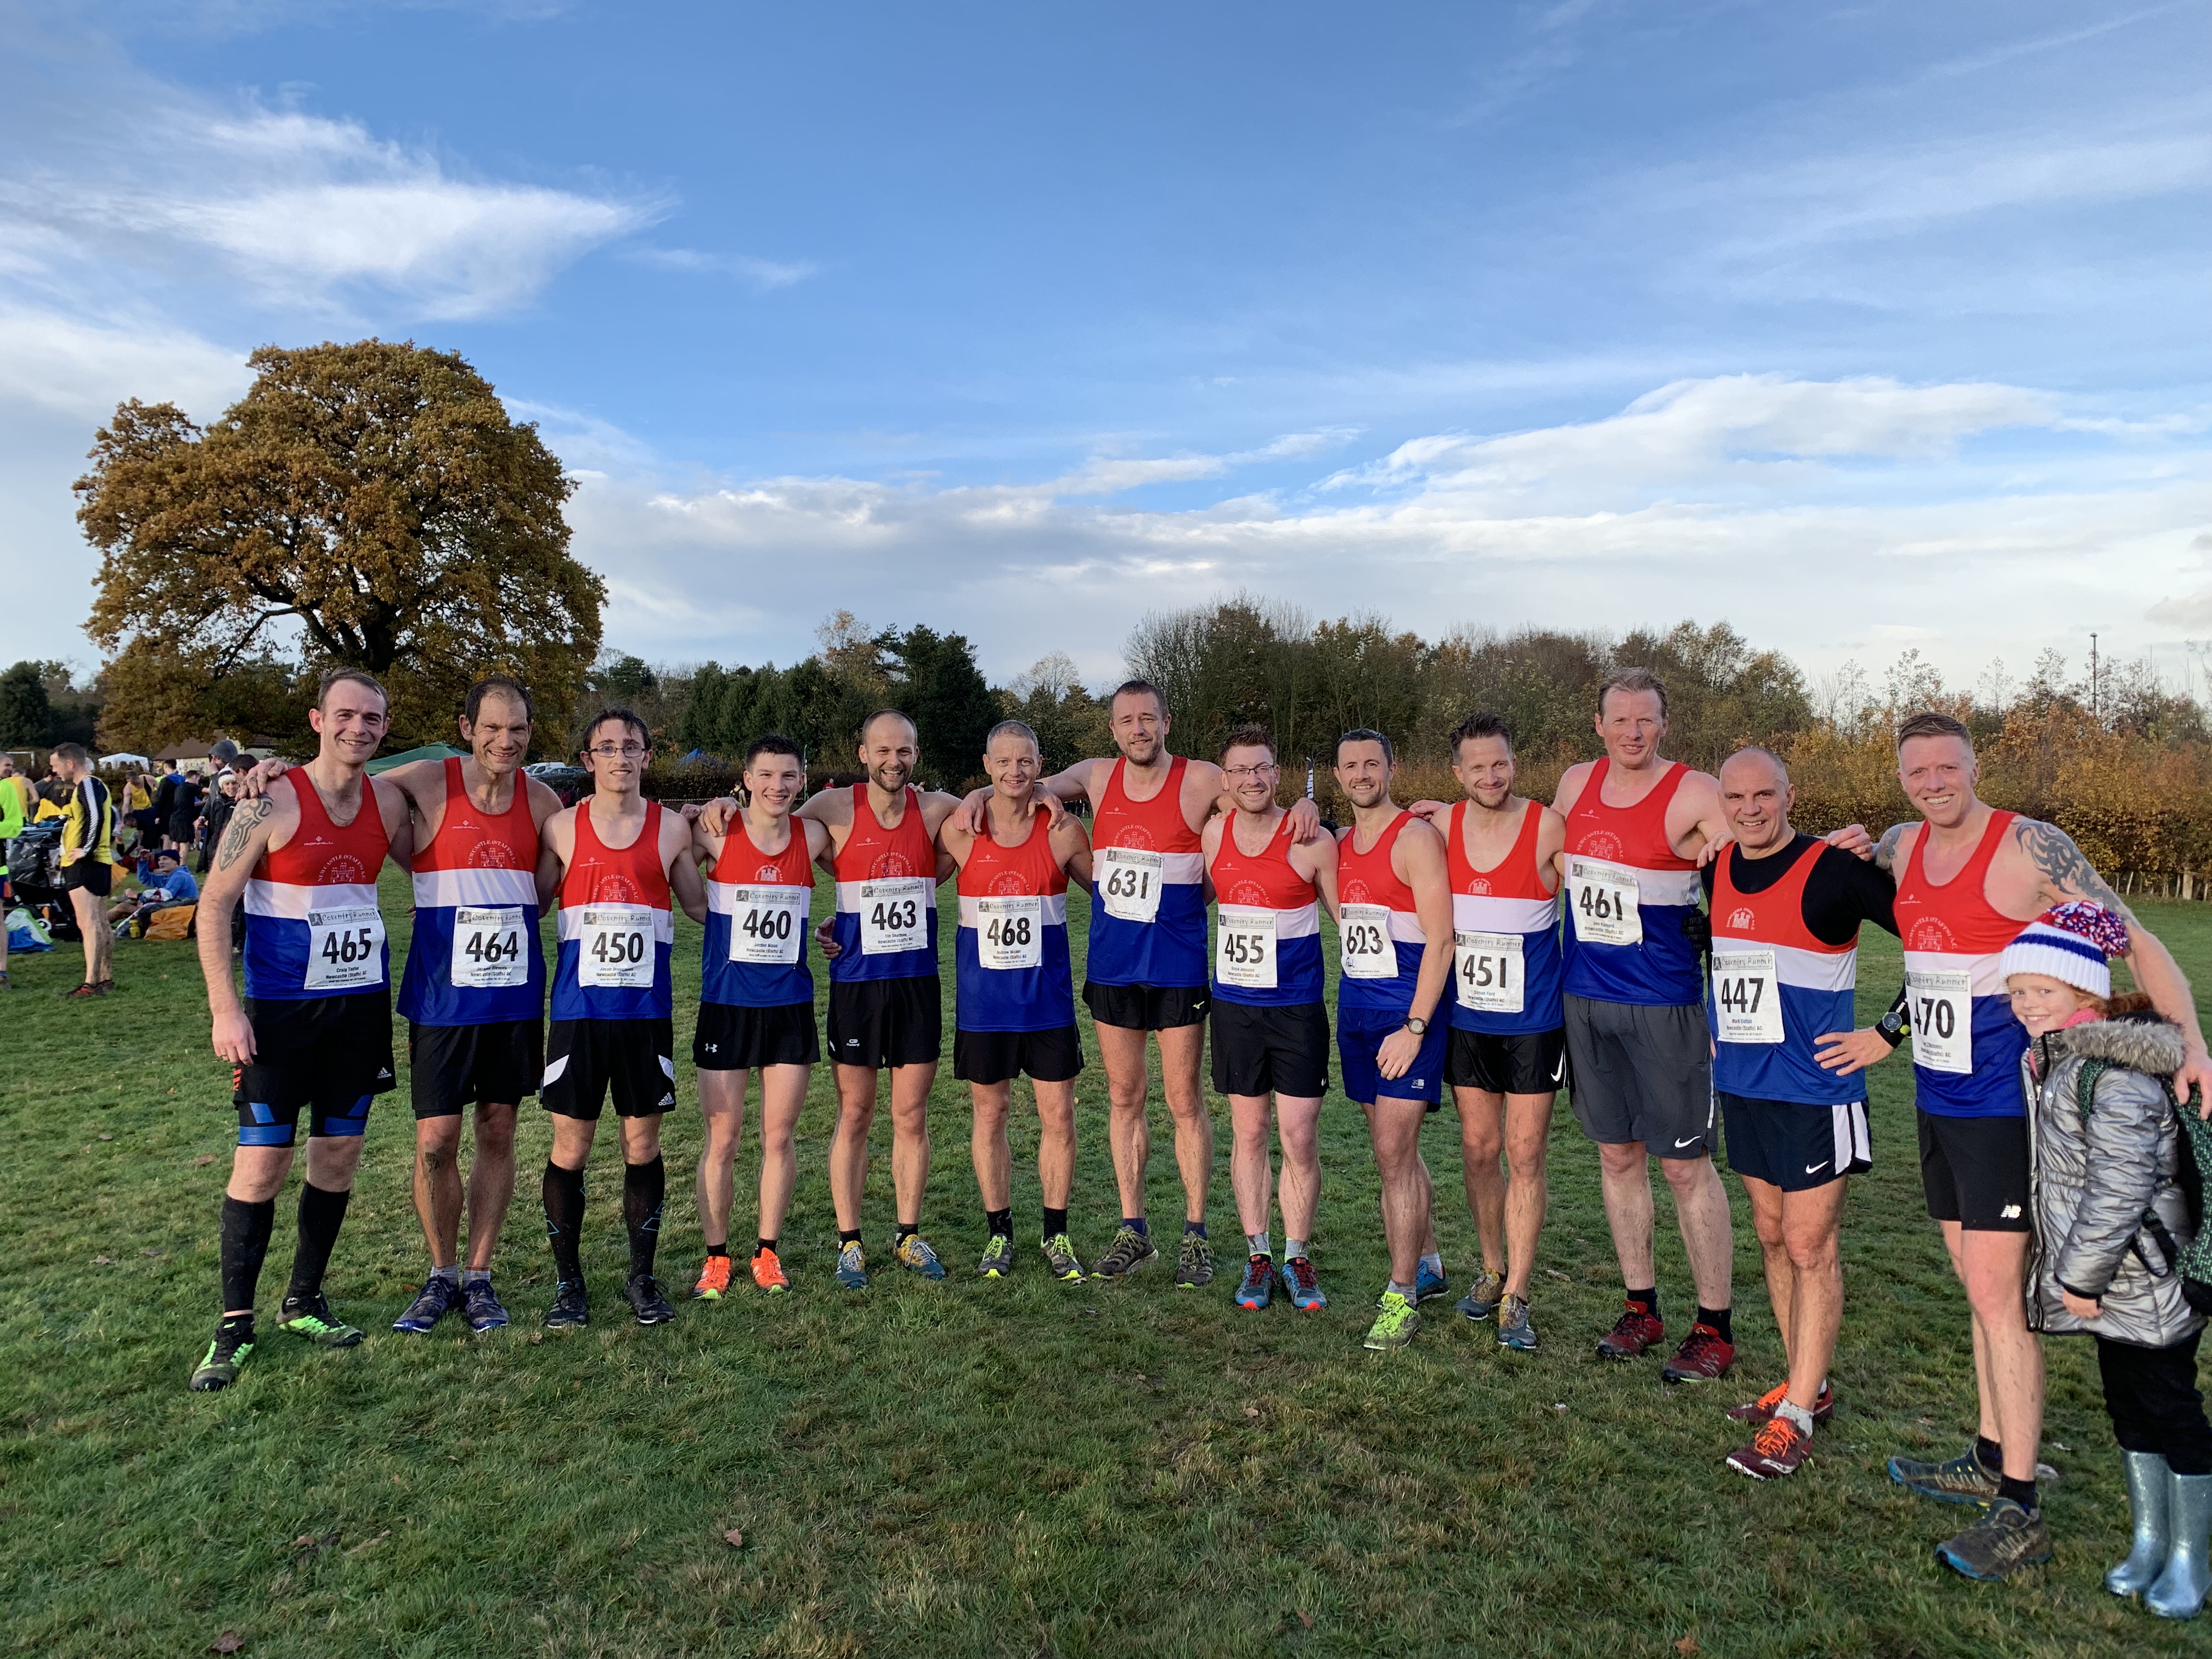 Birmingham & District Cross Country League Race 1 @ Coventry – 10/11/2018